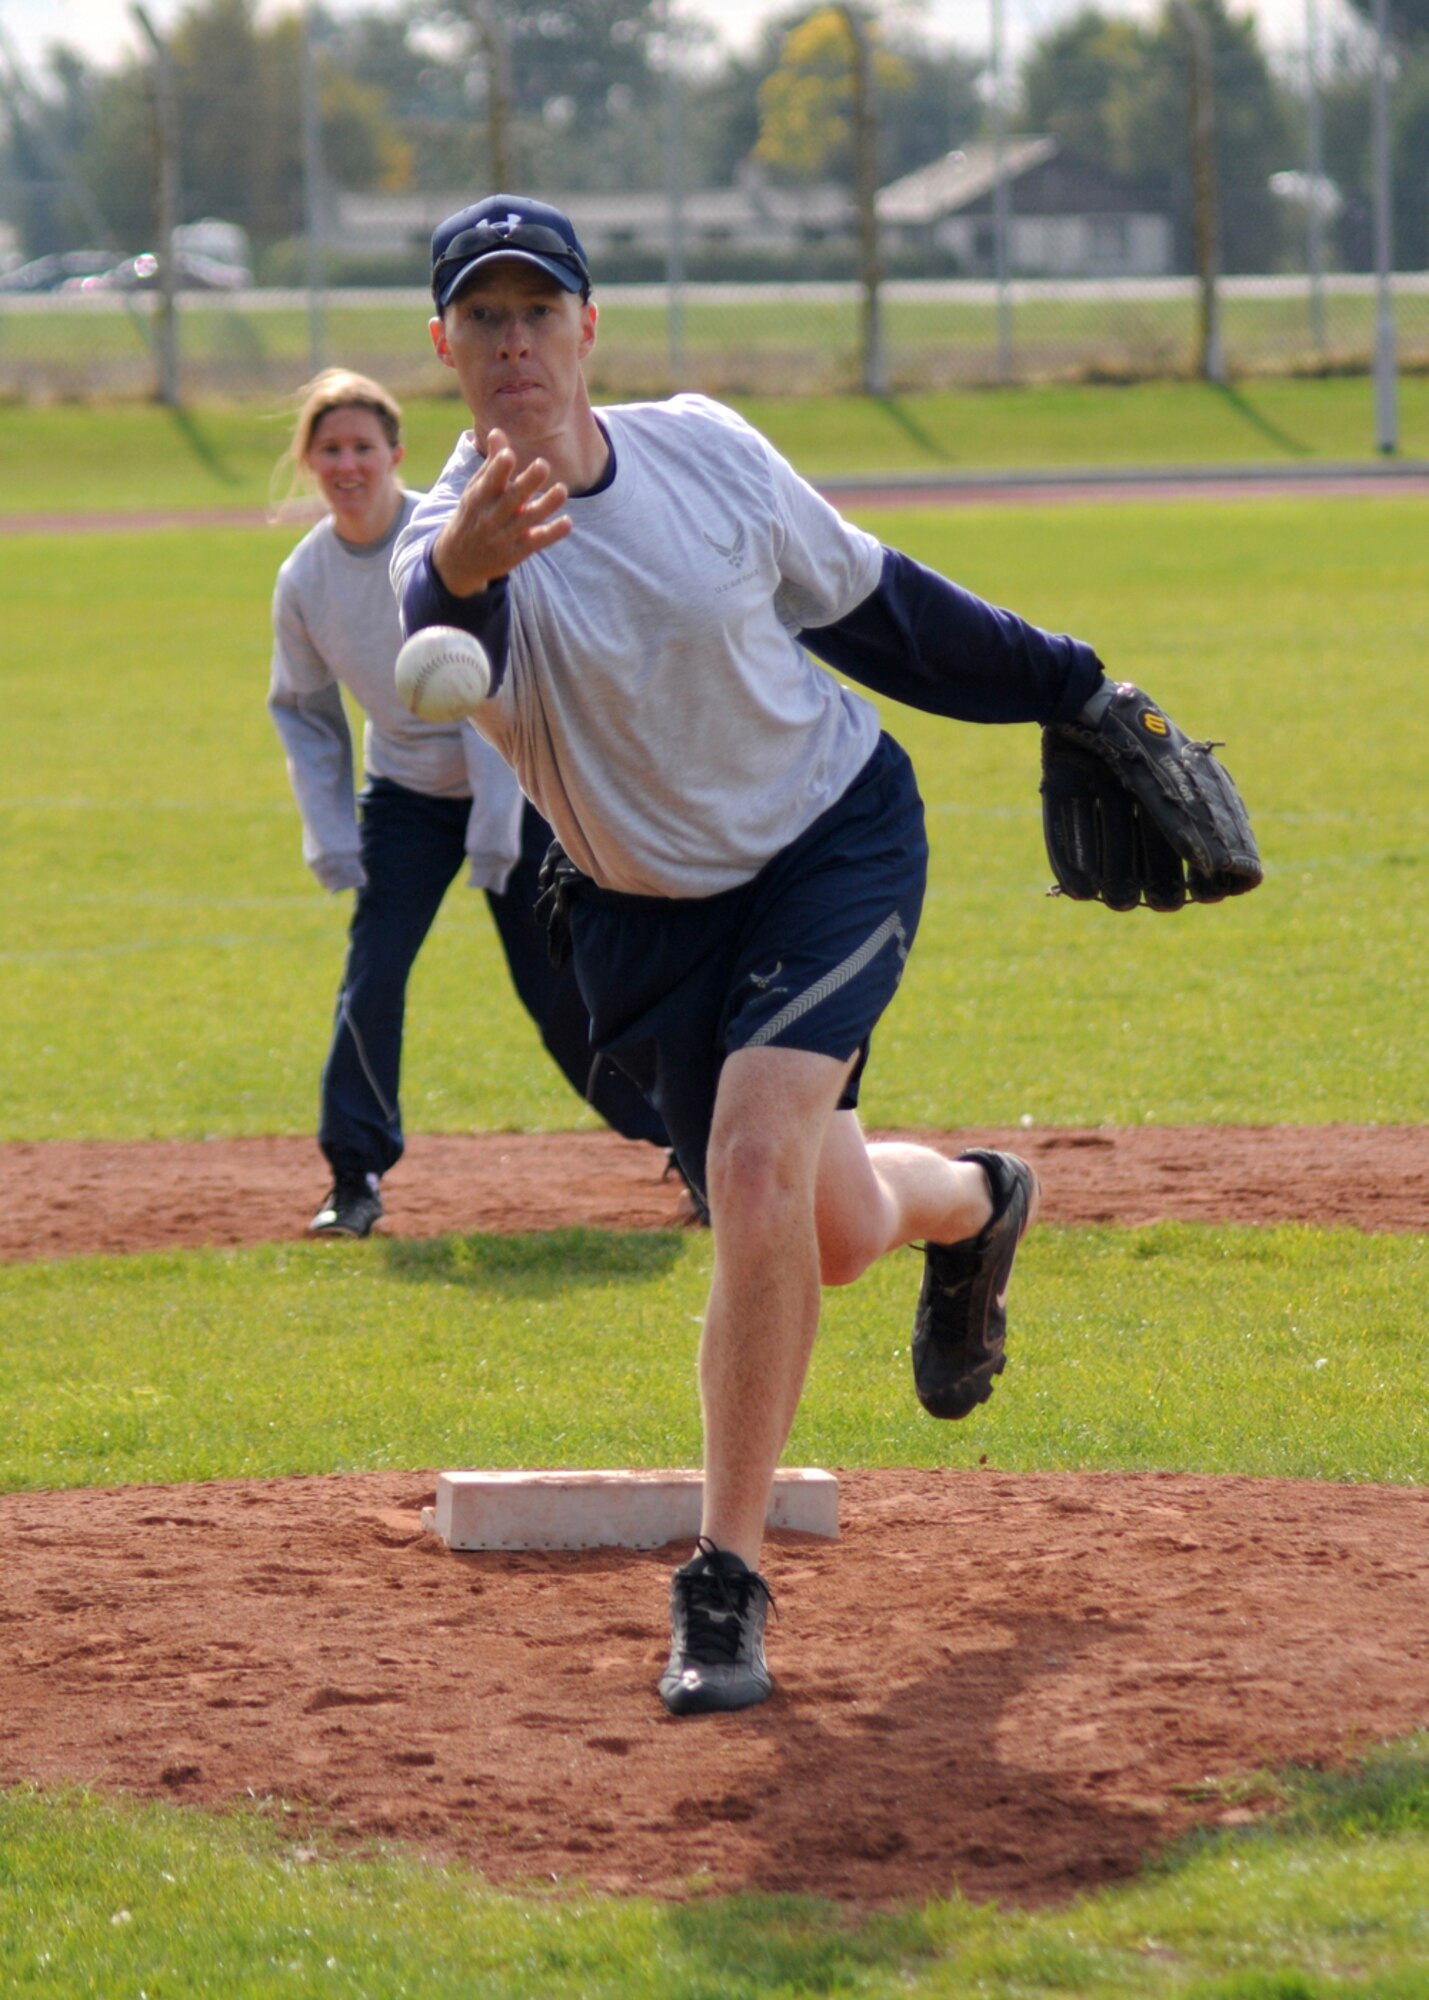 100th Air Refueling Wing Command Chief Master Sgt. Michael Warner delivers a pitch in a softball game during “Wing Sports Day” Oct. 2, at RAF Mildenhall. Wing Sports Day is a day of fun and friendly competition, where Airmen from their respective work centers work together to compete for the top spot and a year’s worth of bragging rights. (U.S. Air Force photo by Staff Sgt. Jerry Fleshman)